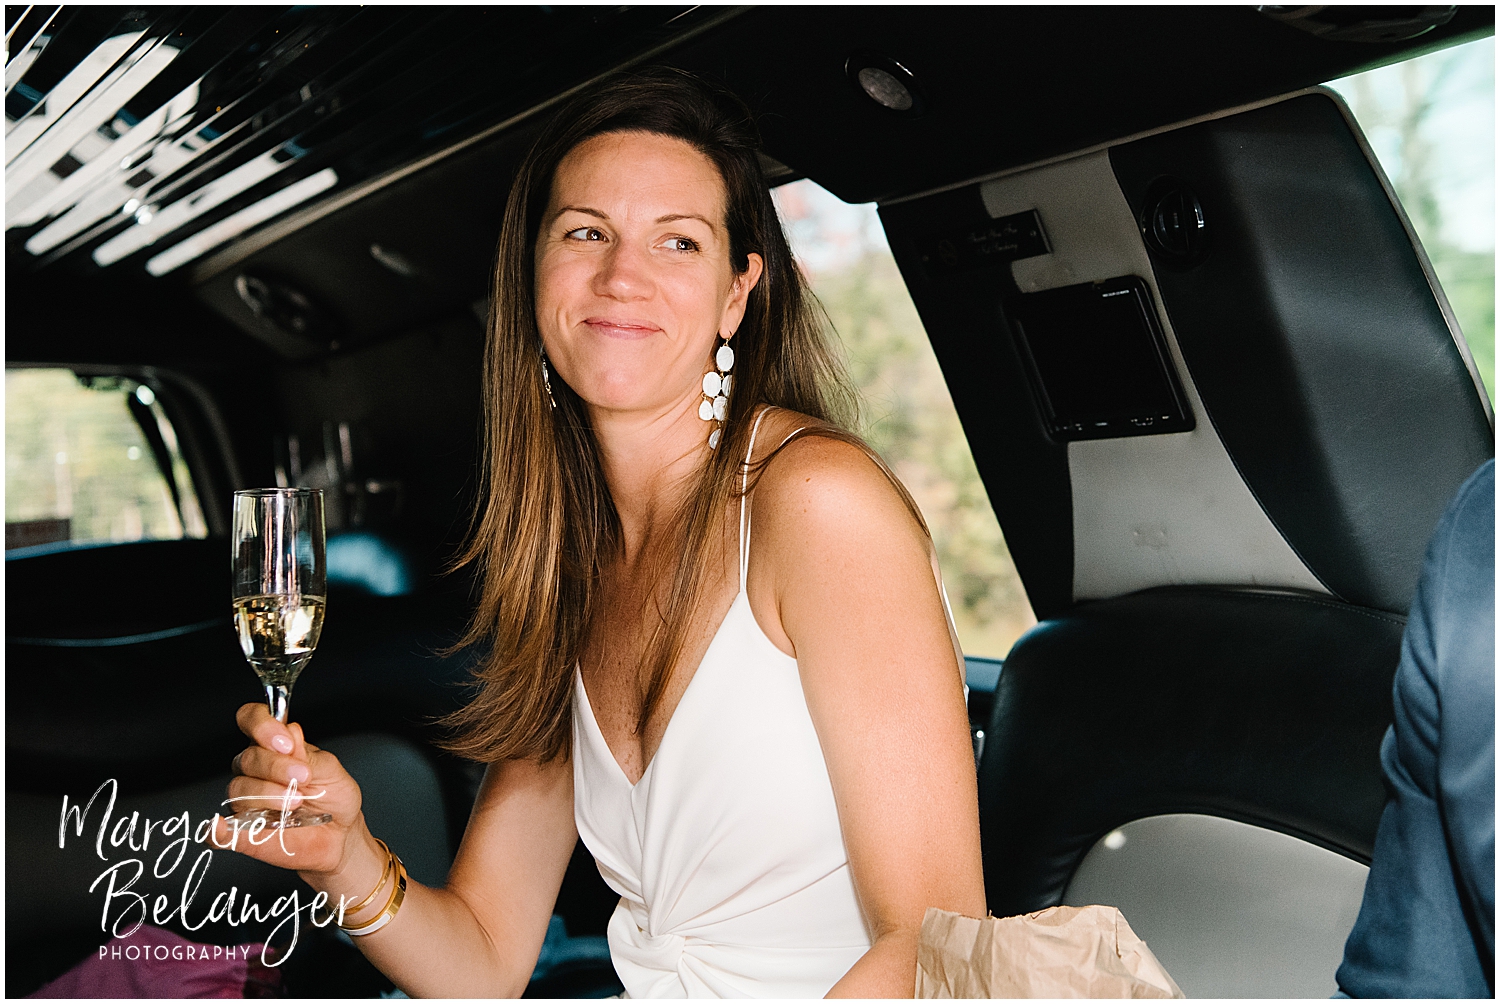 A bride holding a champagne flute while sitting inside a limousine, smirking at the groom who is off-camera.